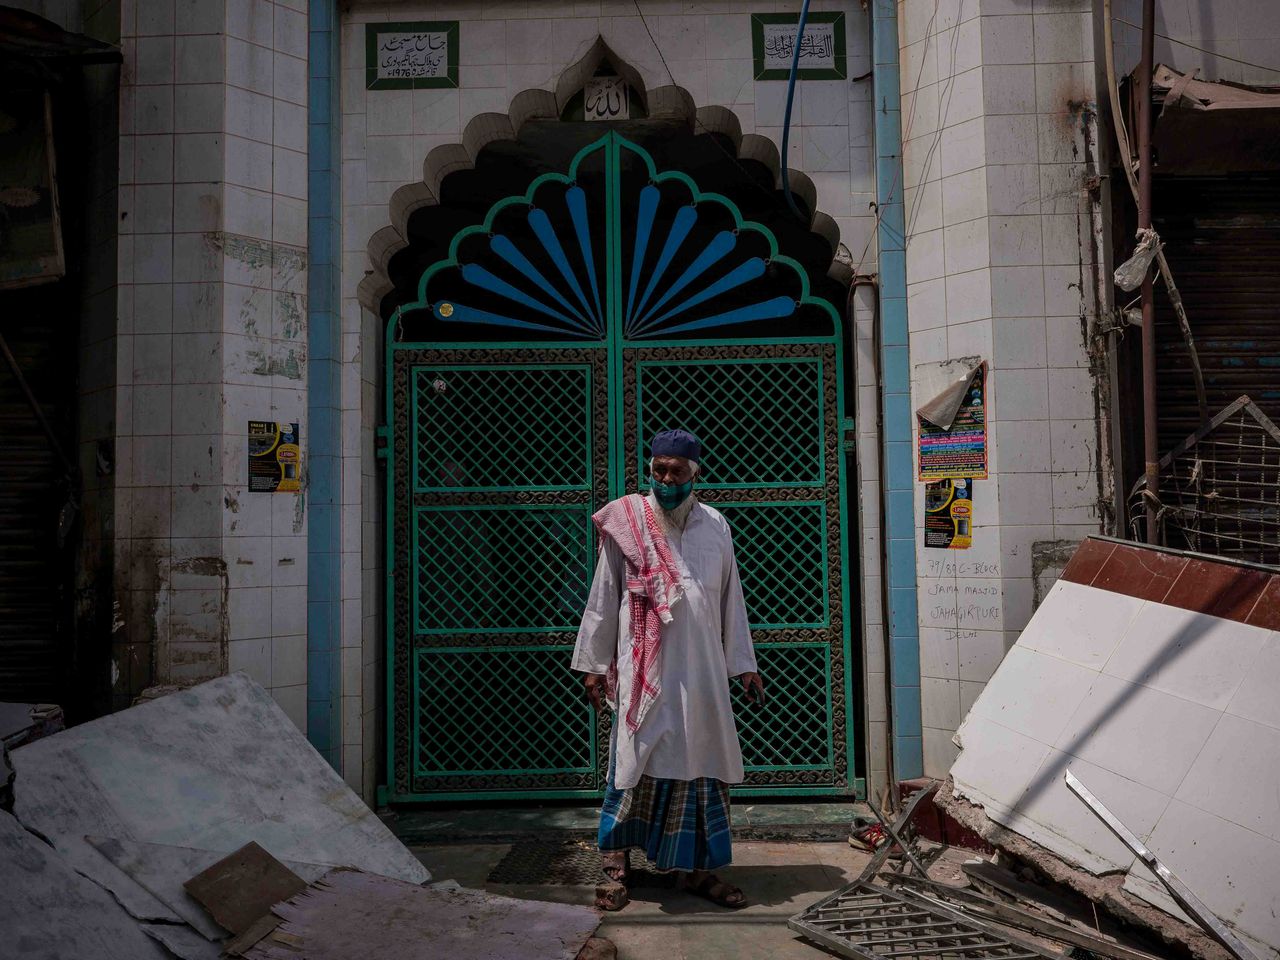 A Muslim man stands in front of the gate of the mosque which is said to be the epicentre of the clashes between two communities after earthmovers razed the structures claimed as encroachment by civic authorities outside the mosque at the clash affected spot in Jahangir Puri in New Delhi on April 20, 2022. Bulldozers continued razing property for nearly two hours after India's chief justice issued an order to halt.